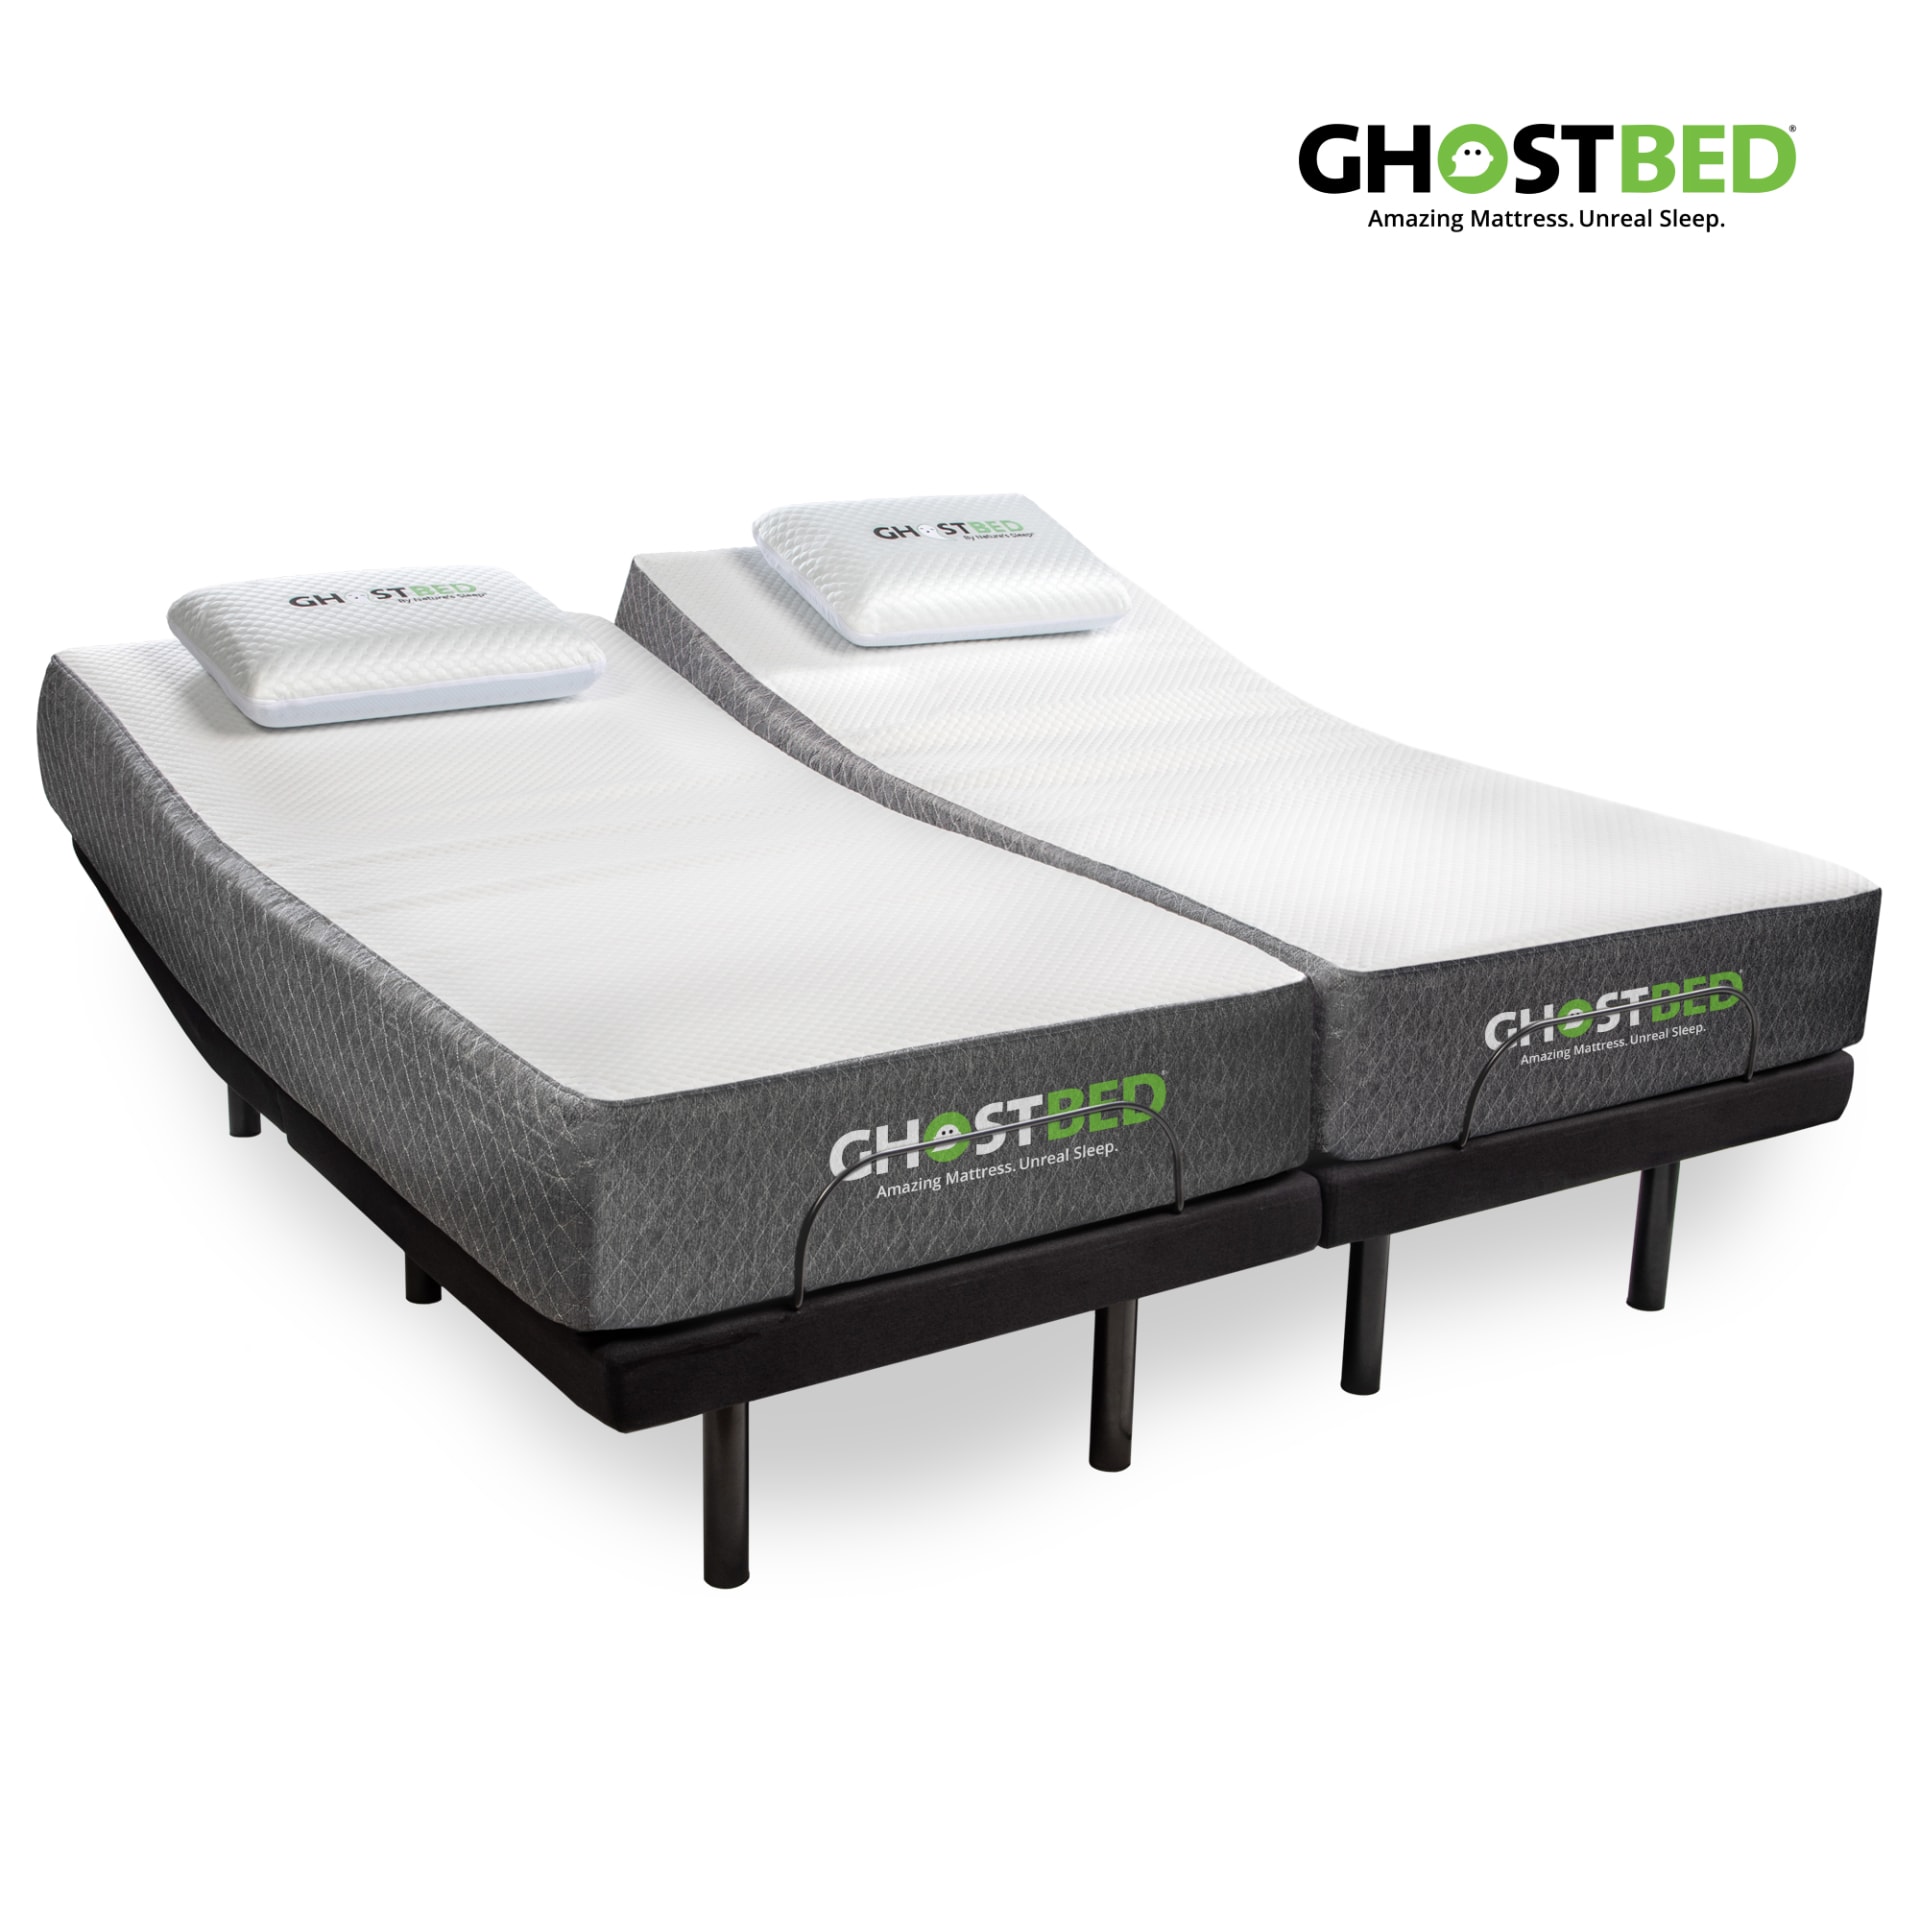 Ghostbed 11 Memory Foam Mattress With, Mattress King Adjustable Beds